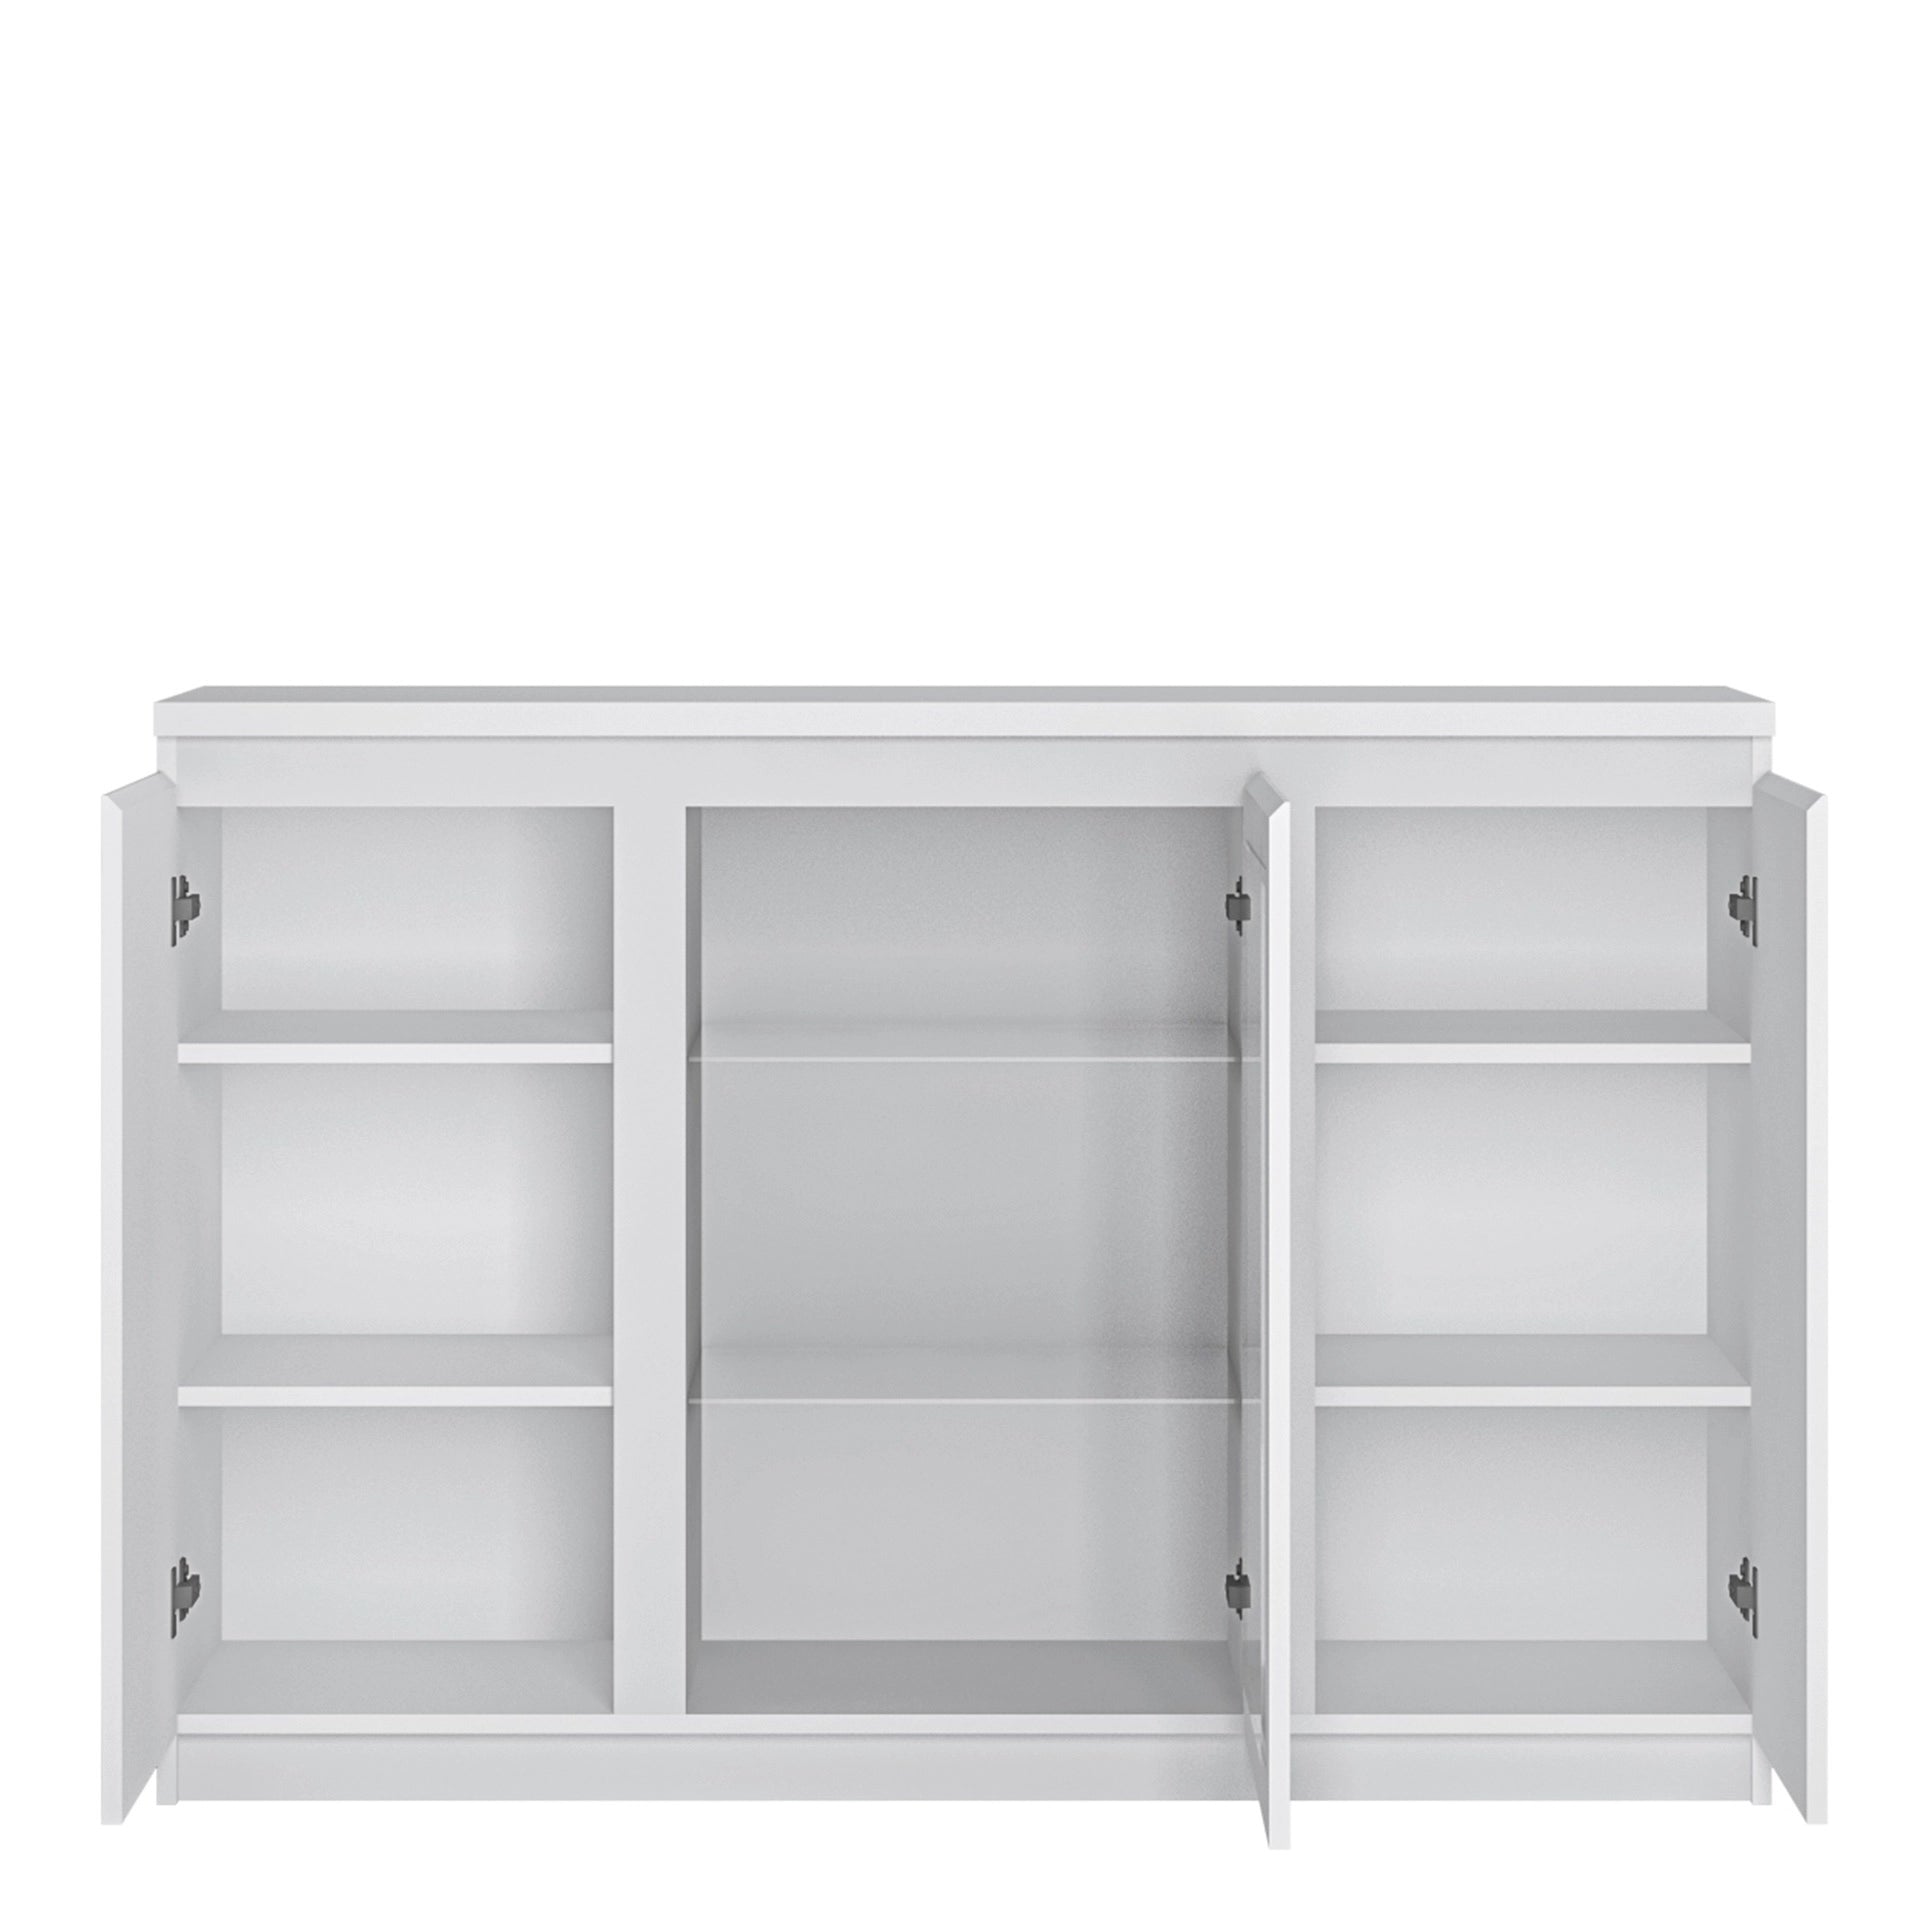 Furniture To Go Fribo 3 Door Sideboard (Glazed Centre) in White